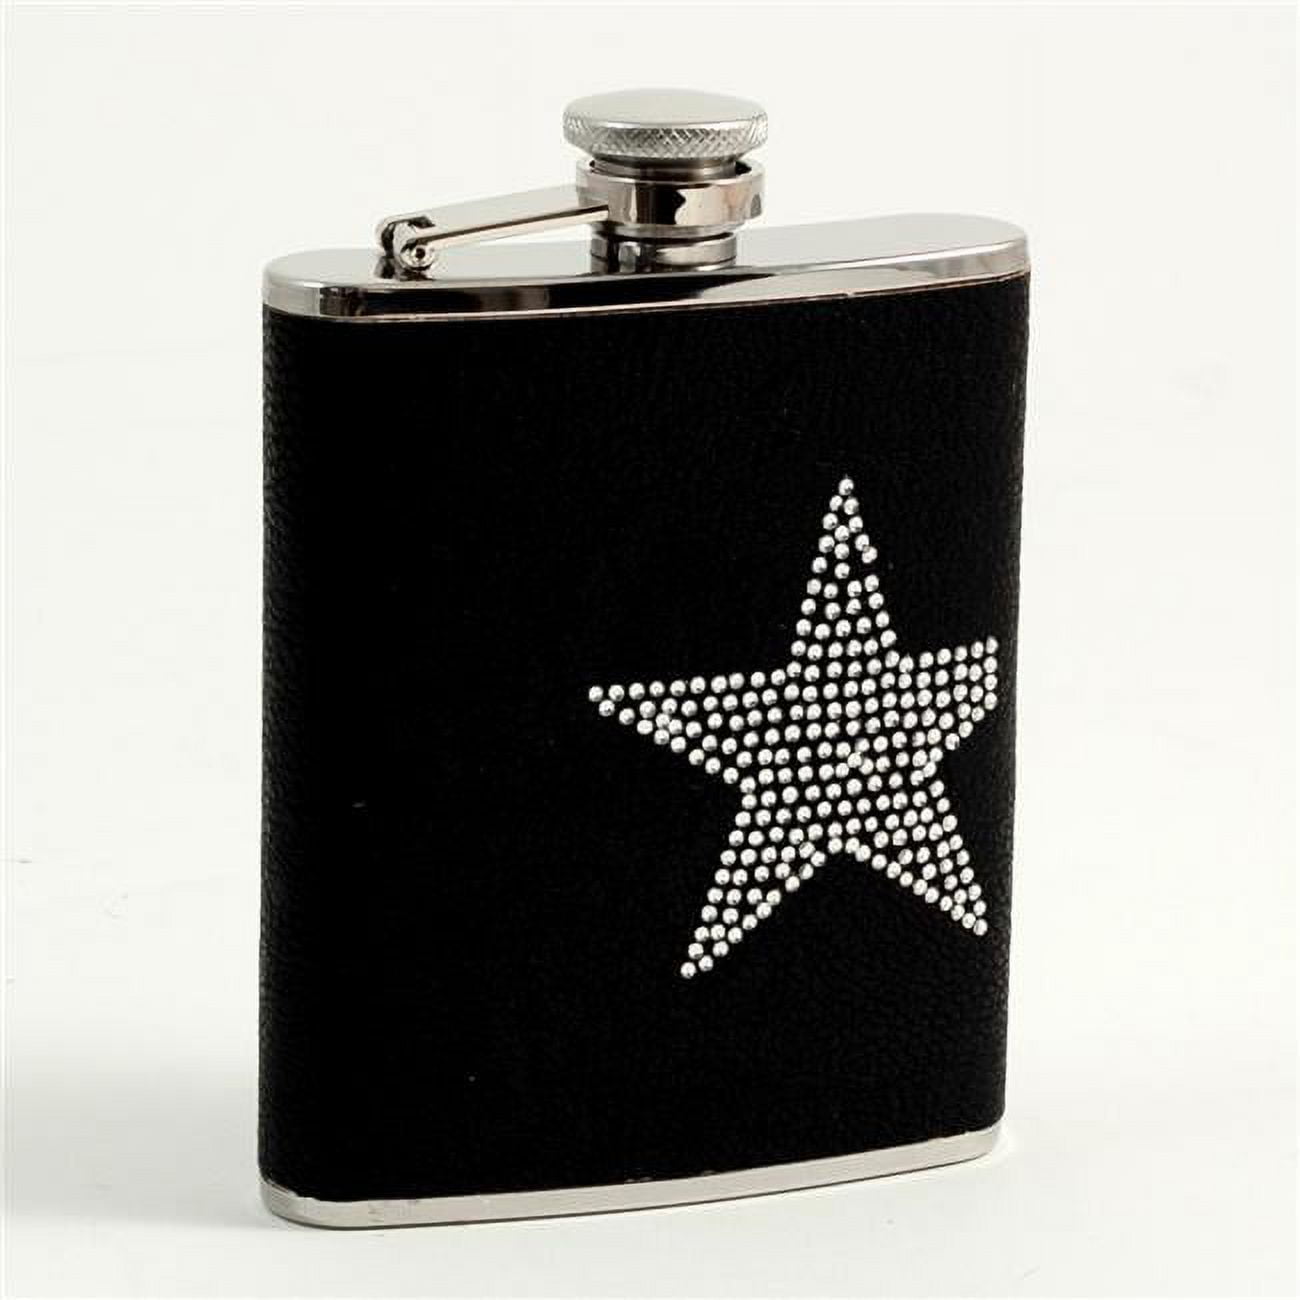 Picture of Bey-Berk International FS416 6 oz Stainless Steel Leatherette Flask with Reign Stone Star Design Captive Cap &amp; Durable Rubber Seal - Black &amp; Silver